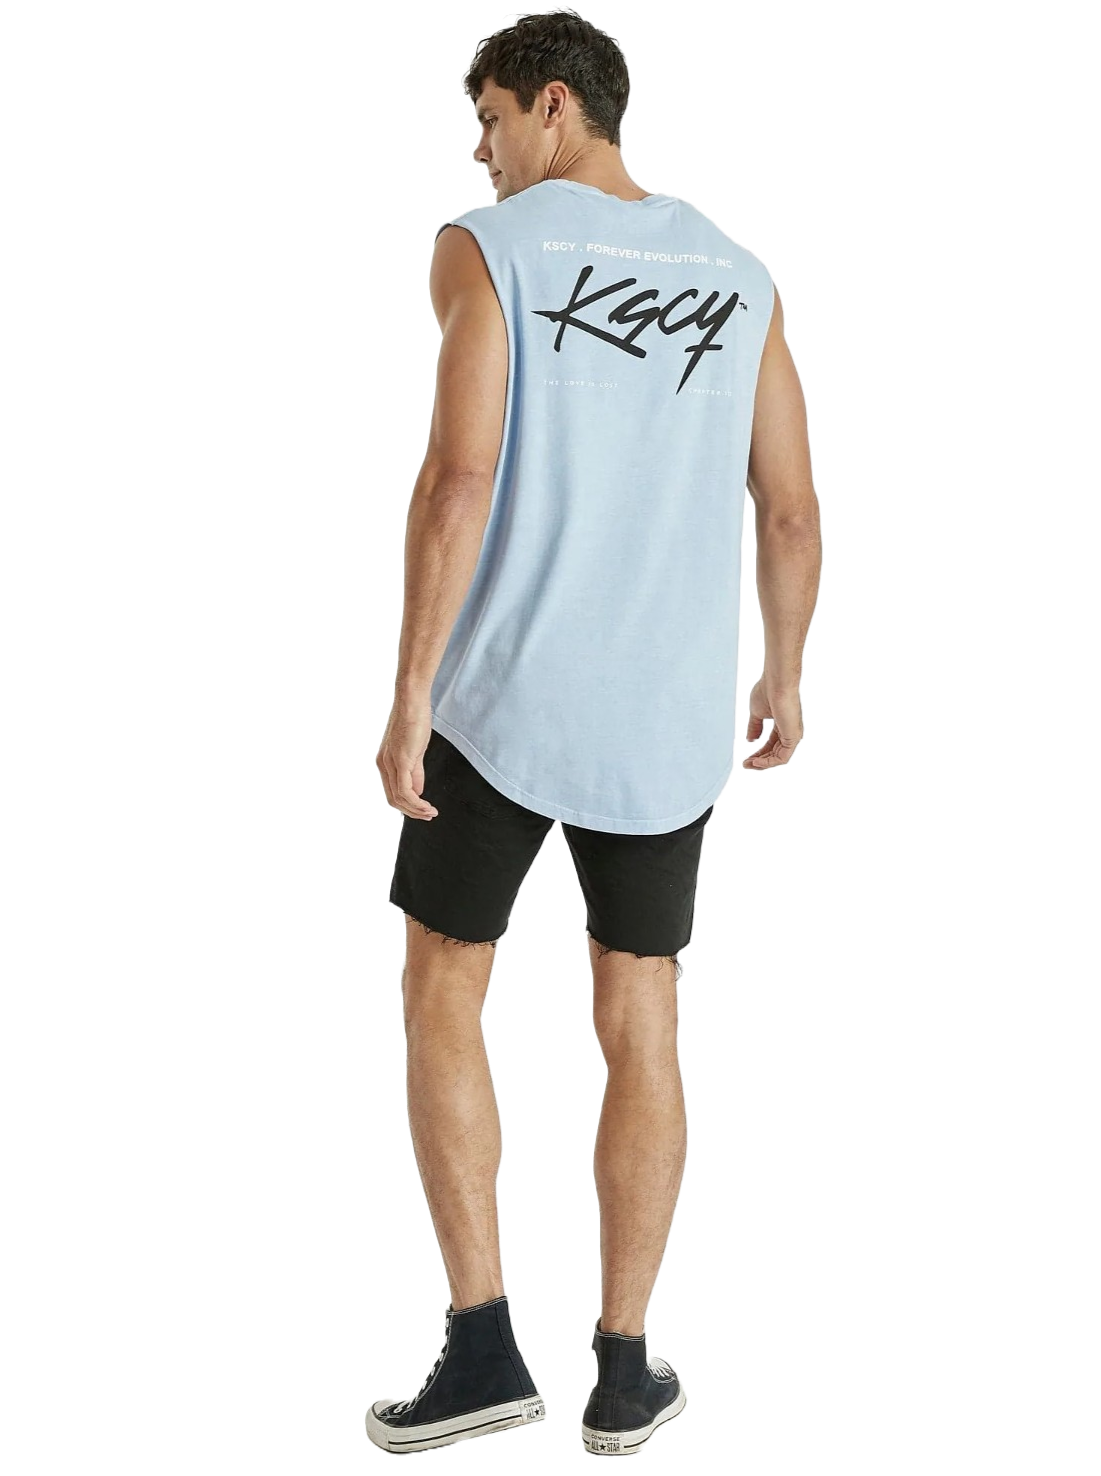 Kiss Chacey - KSCY Misfit Dual Curved Muscle Tee - Pigment Lavender